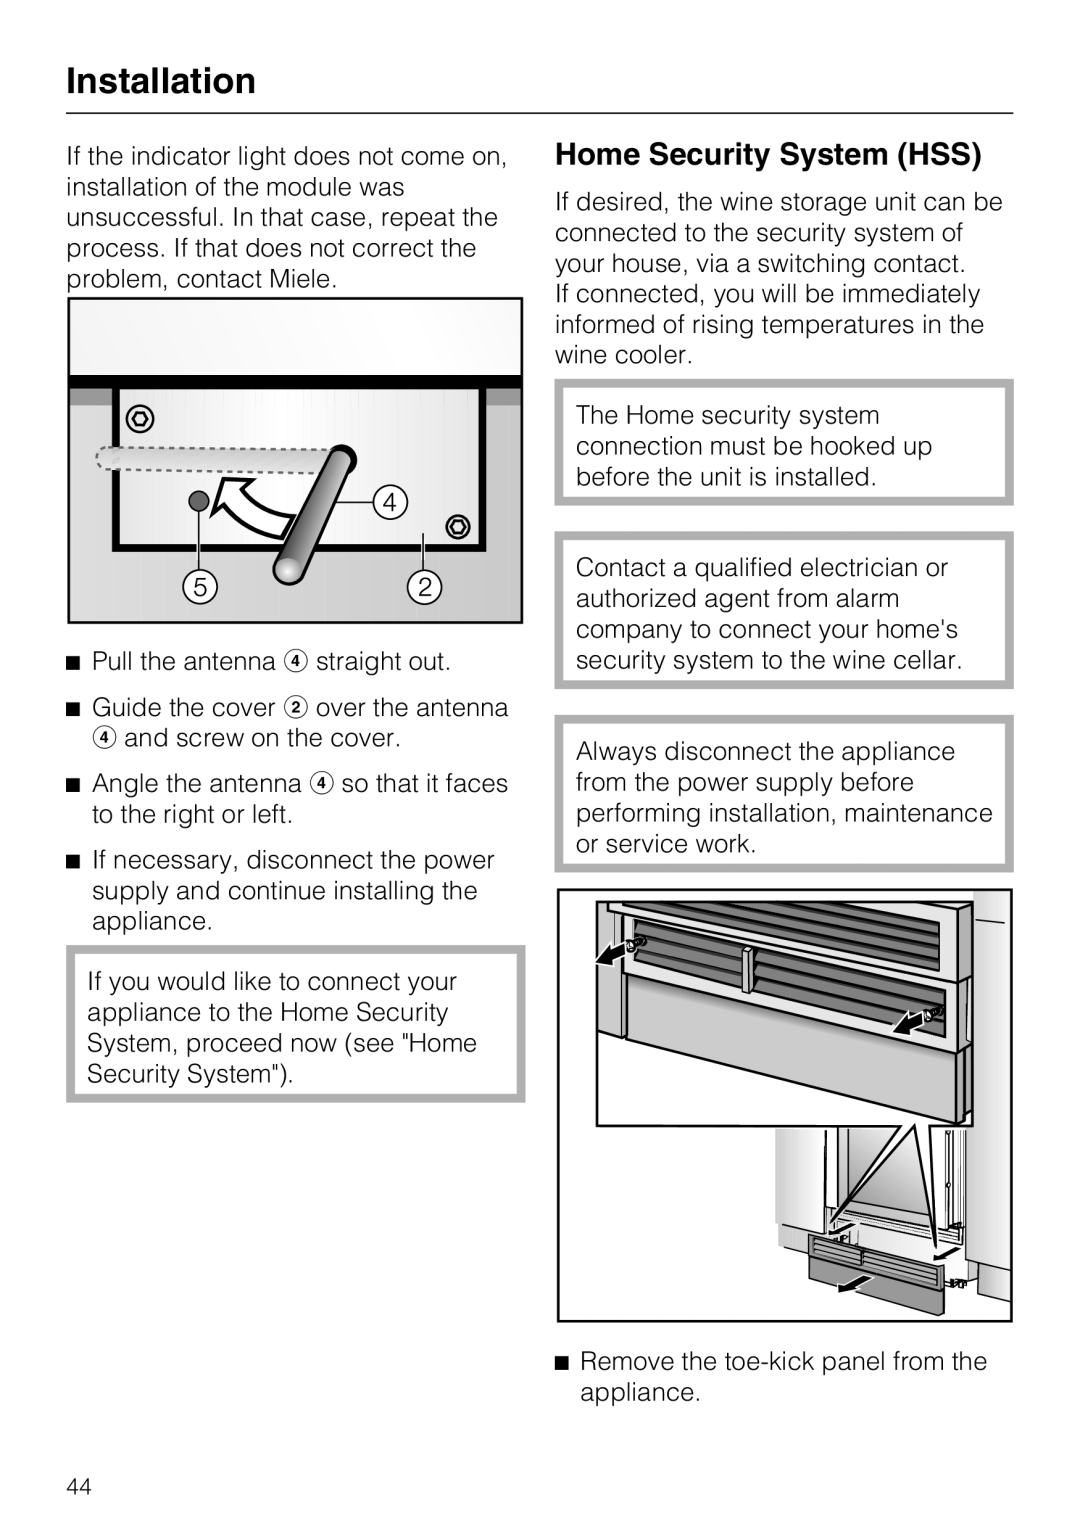 Miele KWT1611SF, KWT1601SF installation instructions Home Security System HSS, Installation 